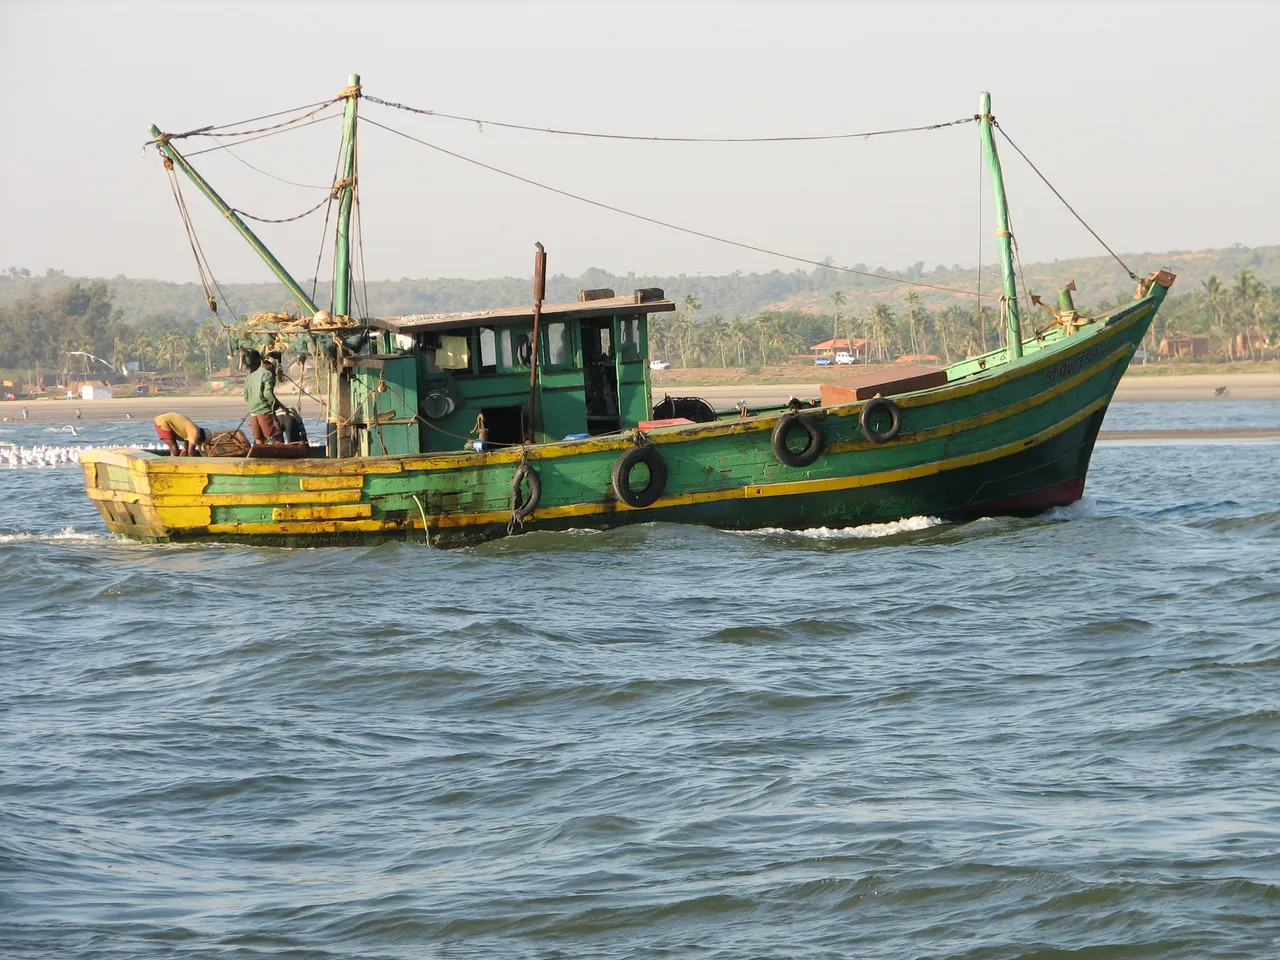 Annual fishing ban in Goa to come into force from June 1: fisheries minister